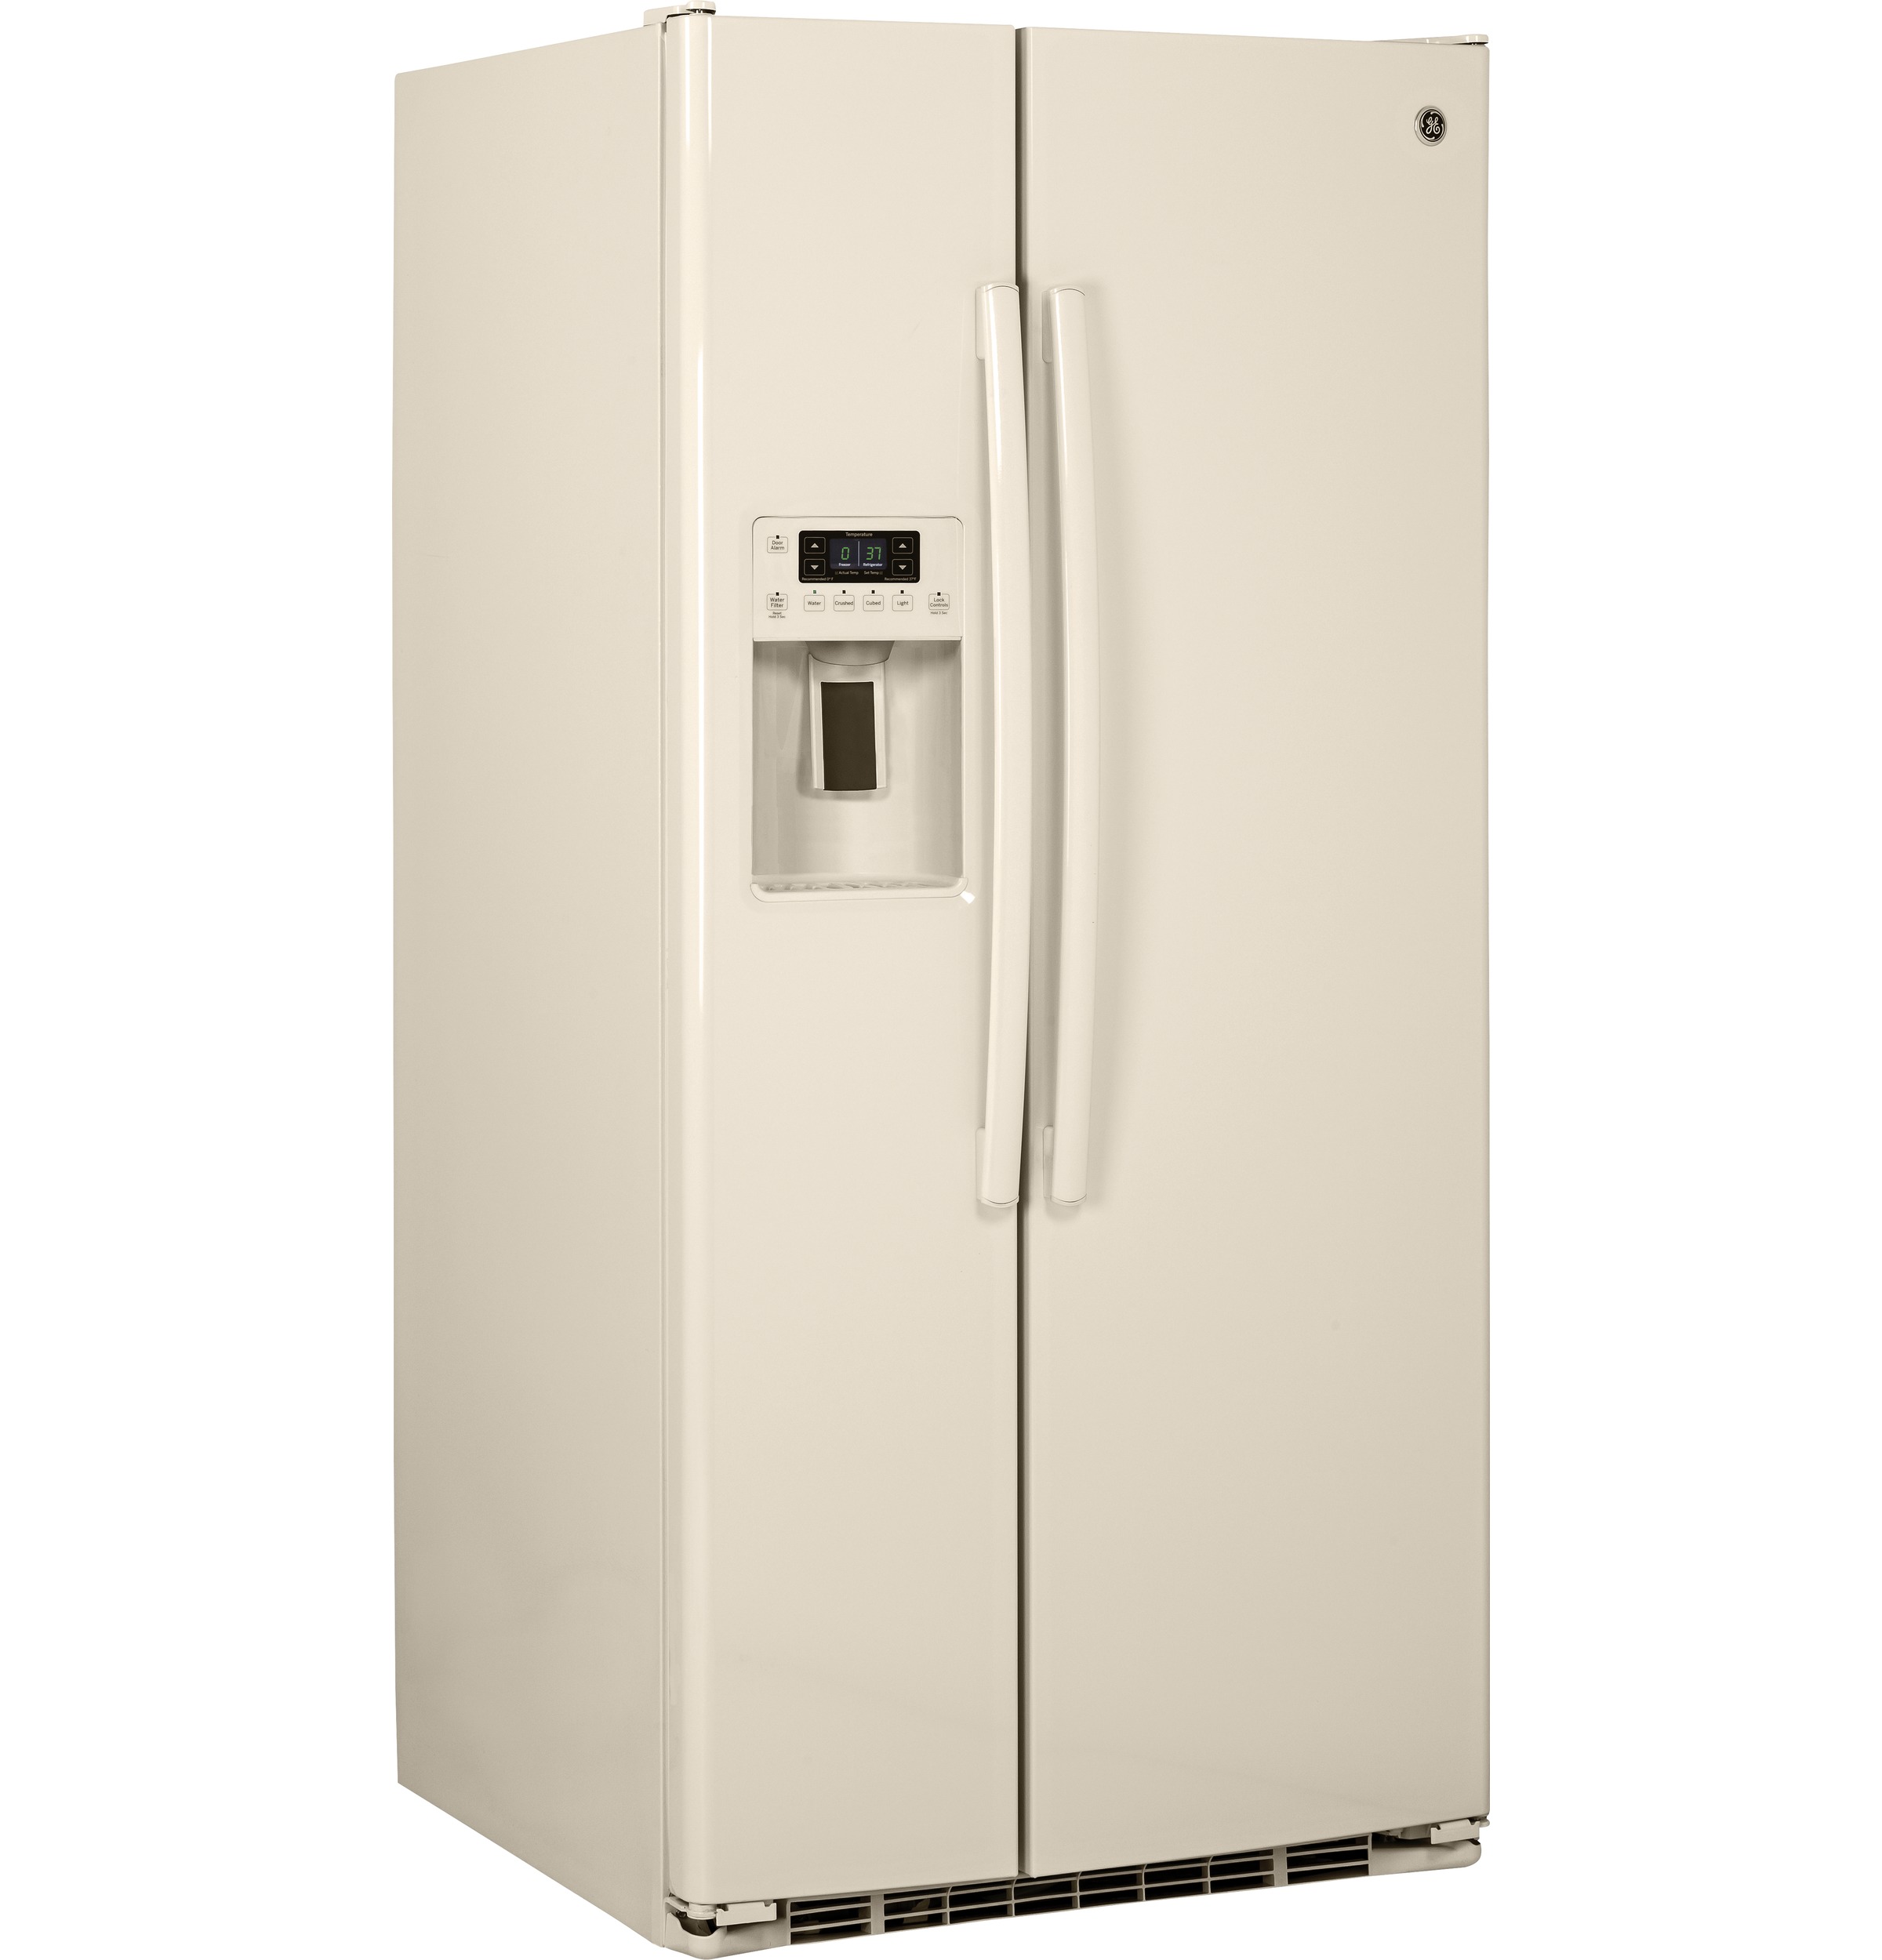 Questions and Answers: GE 23.2 Cu. Ft. Side-by-Side Refrigerator with ...